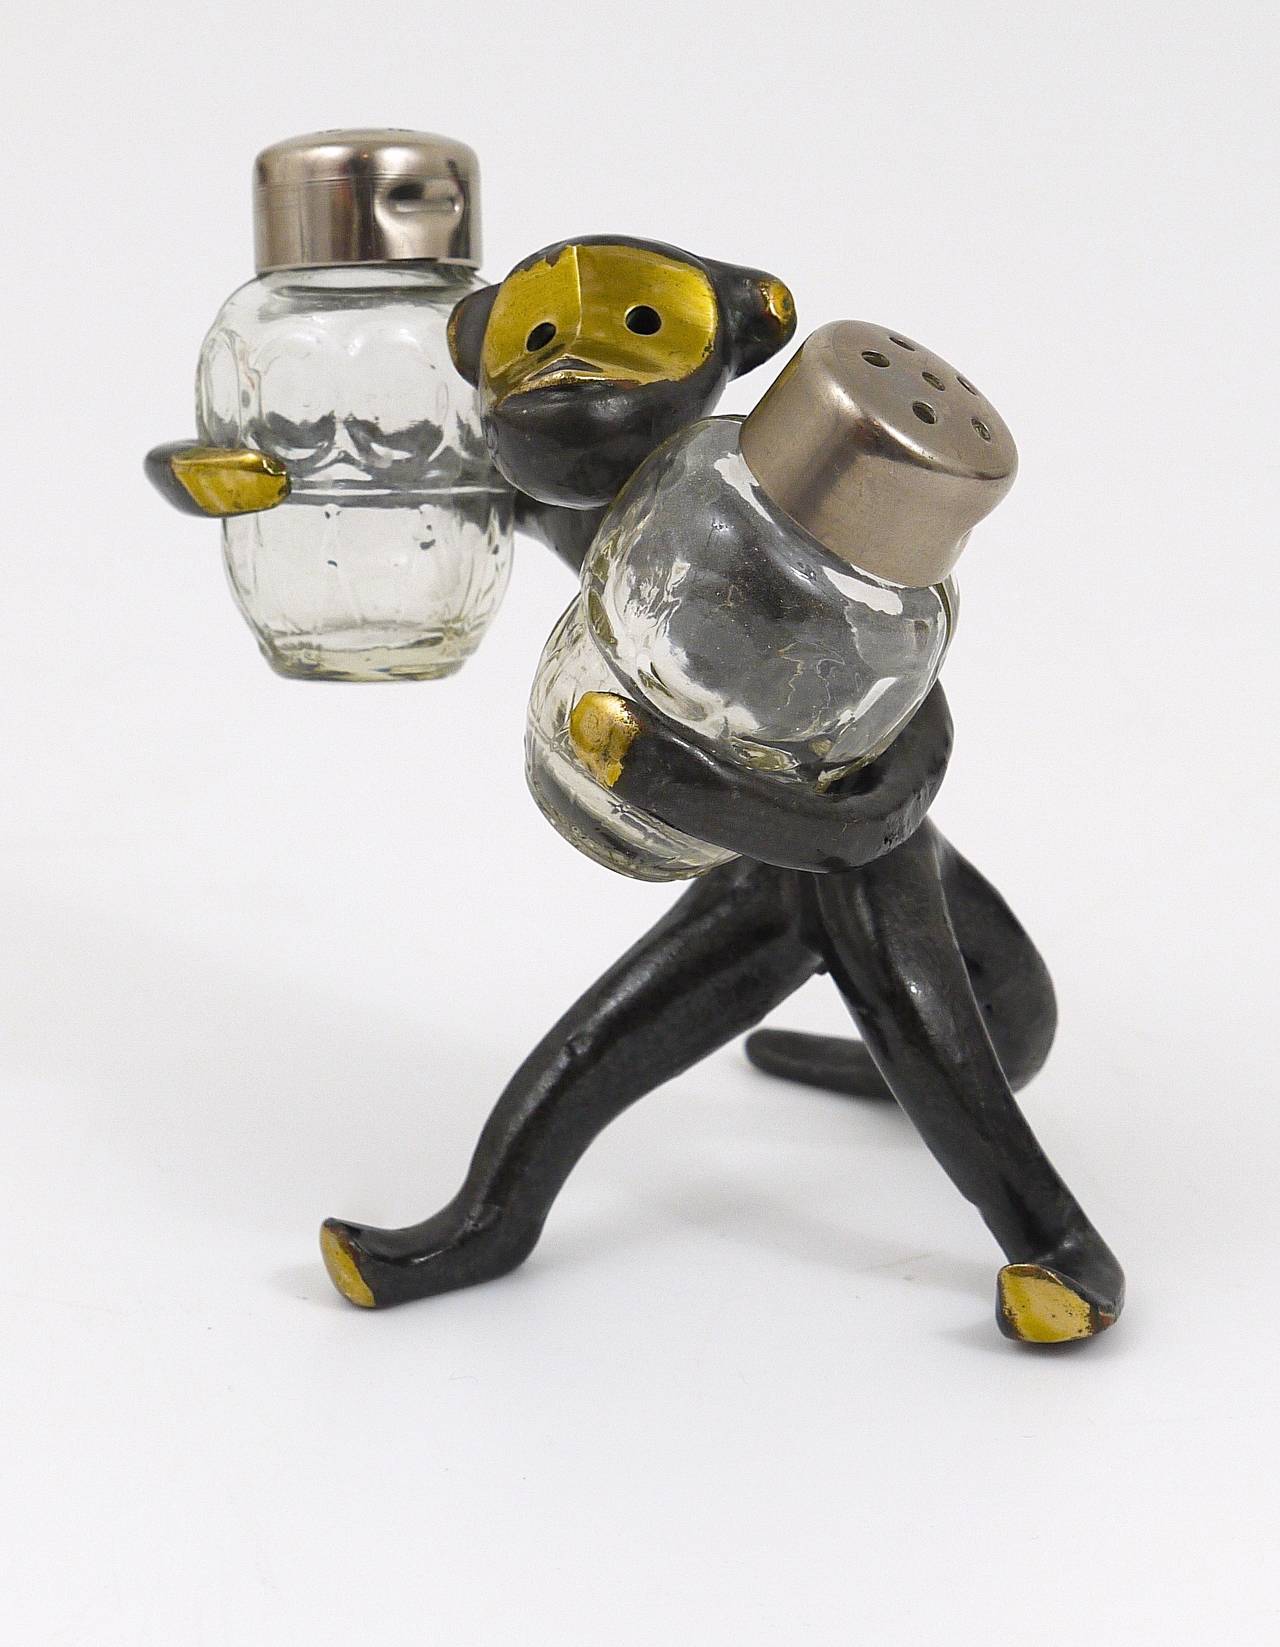 A very charming Austrian shaker set, displaying a monkey. A very humorous design by Walter Bosse, executed by Baller Austria in the 1950s. Made of brass, in excellent condition.